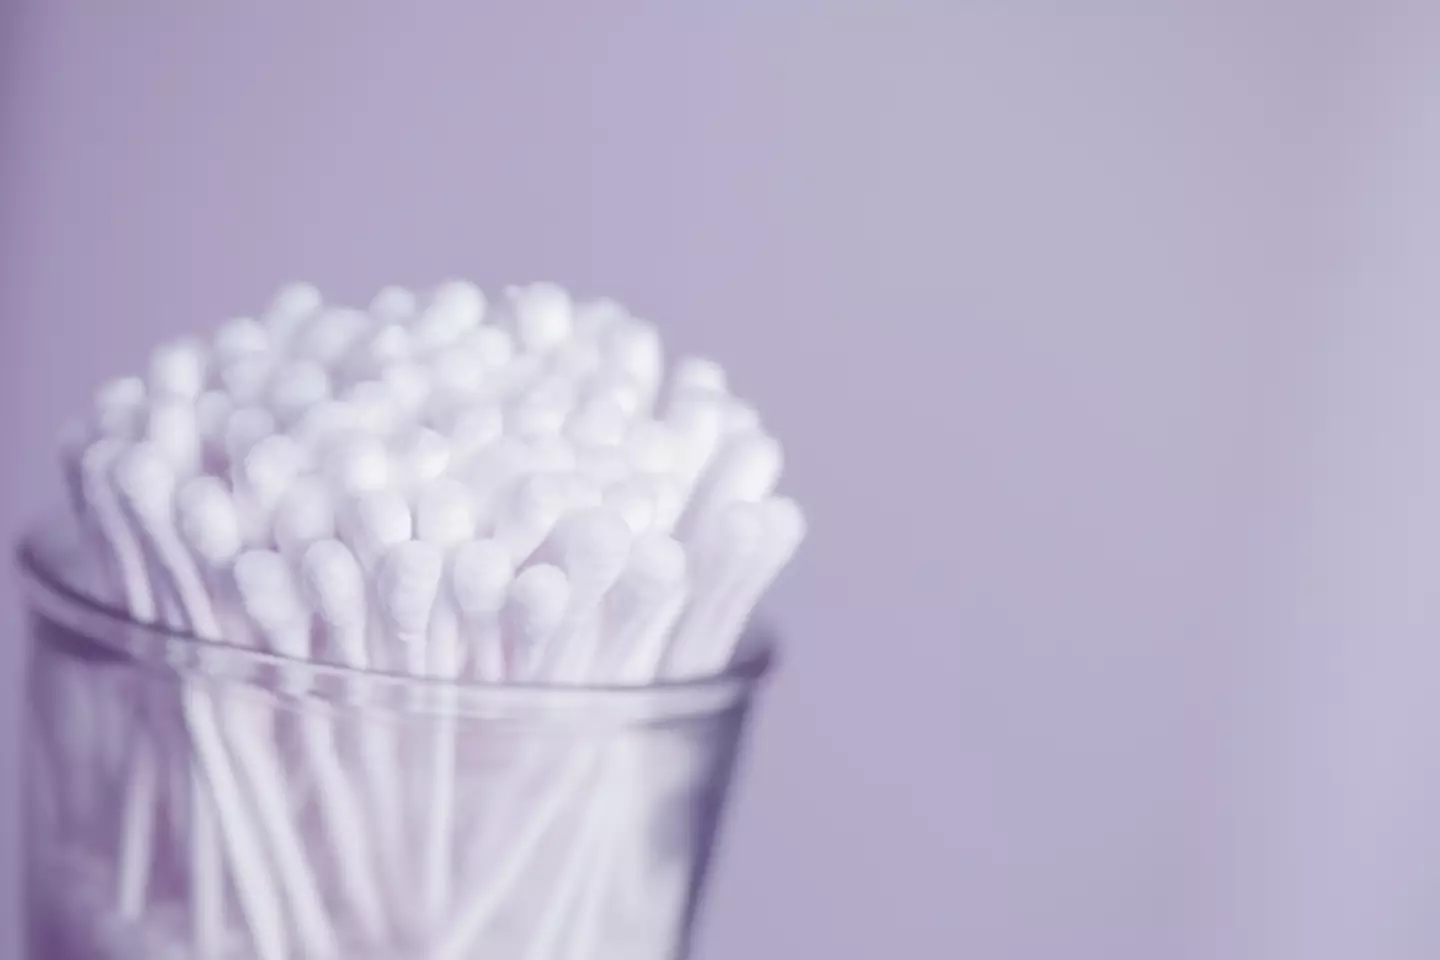 Doctors warn that using a cotton bud to clean your ears can cause more damage than good.